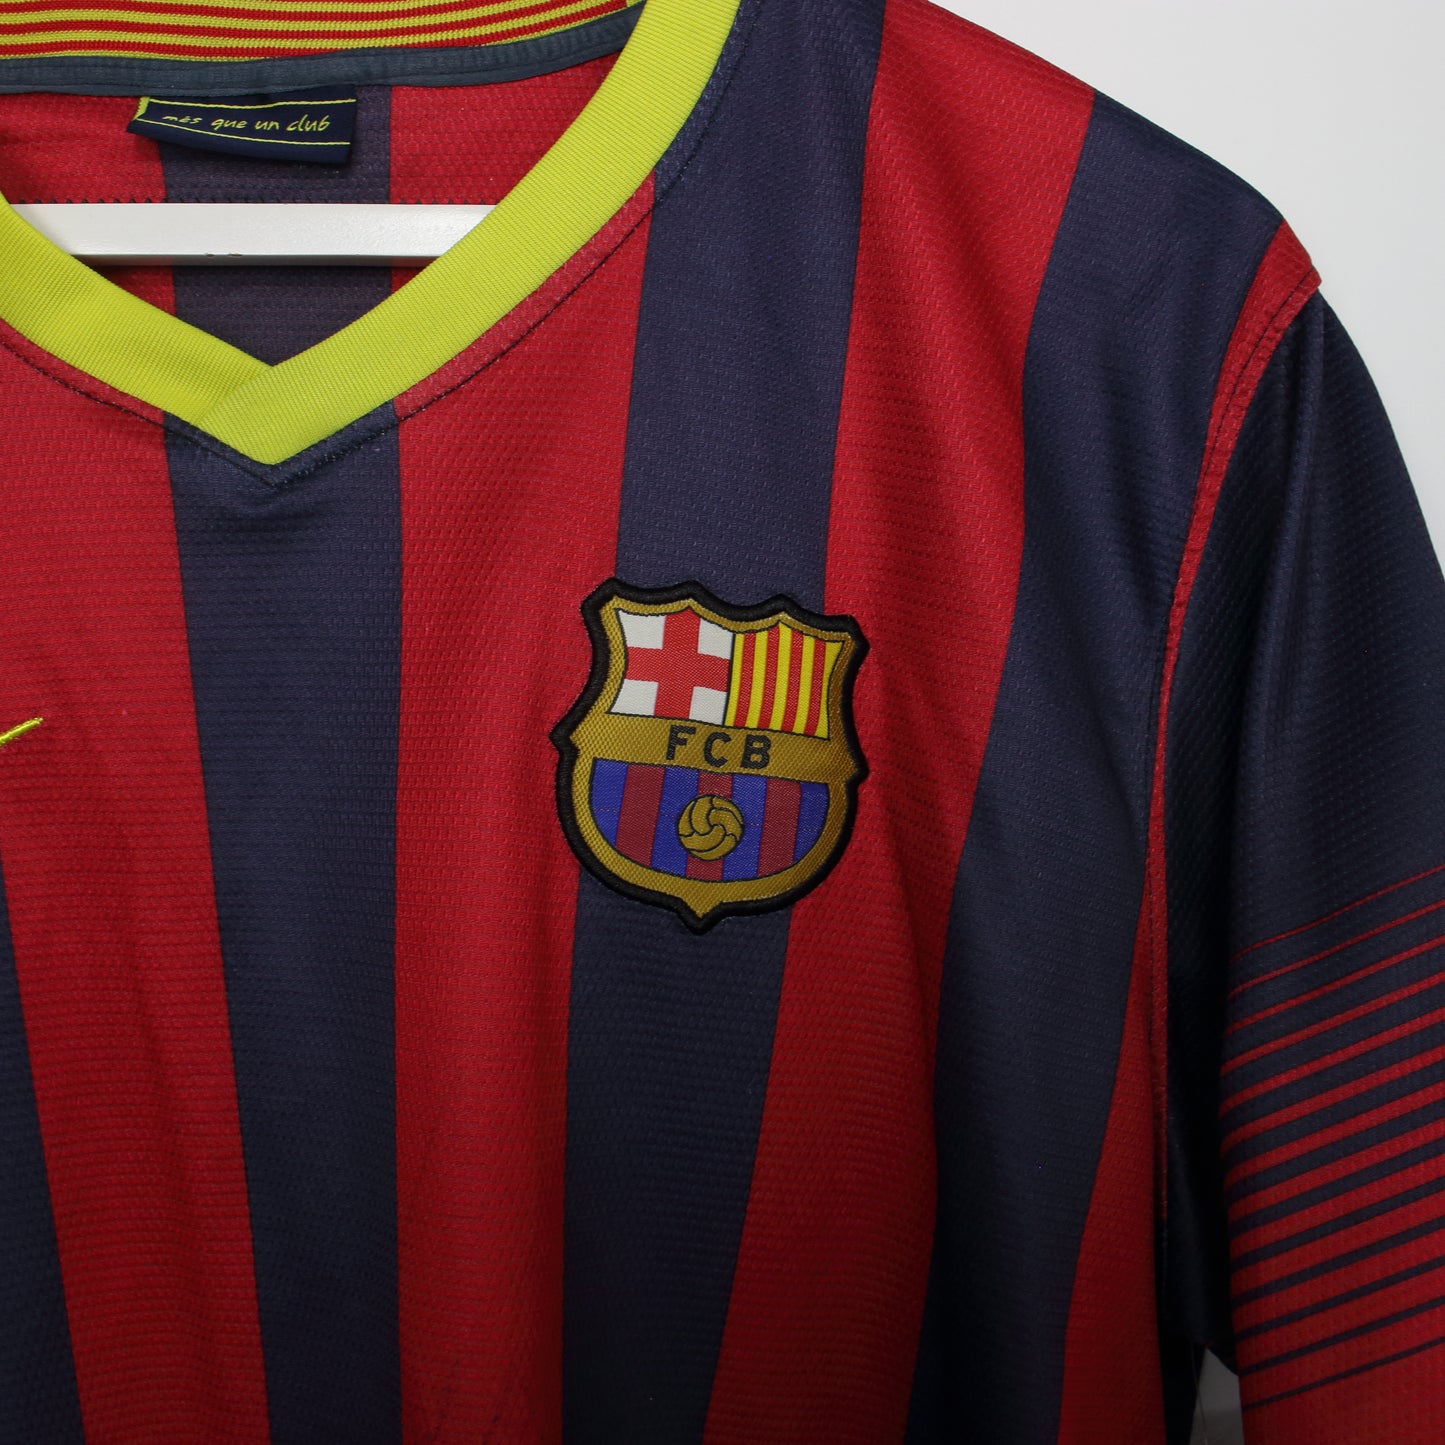 Vintage Replica Nike Barcelona 2013/14 Home football shirt in red and blue. Best fits M